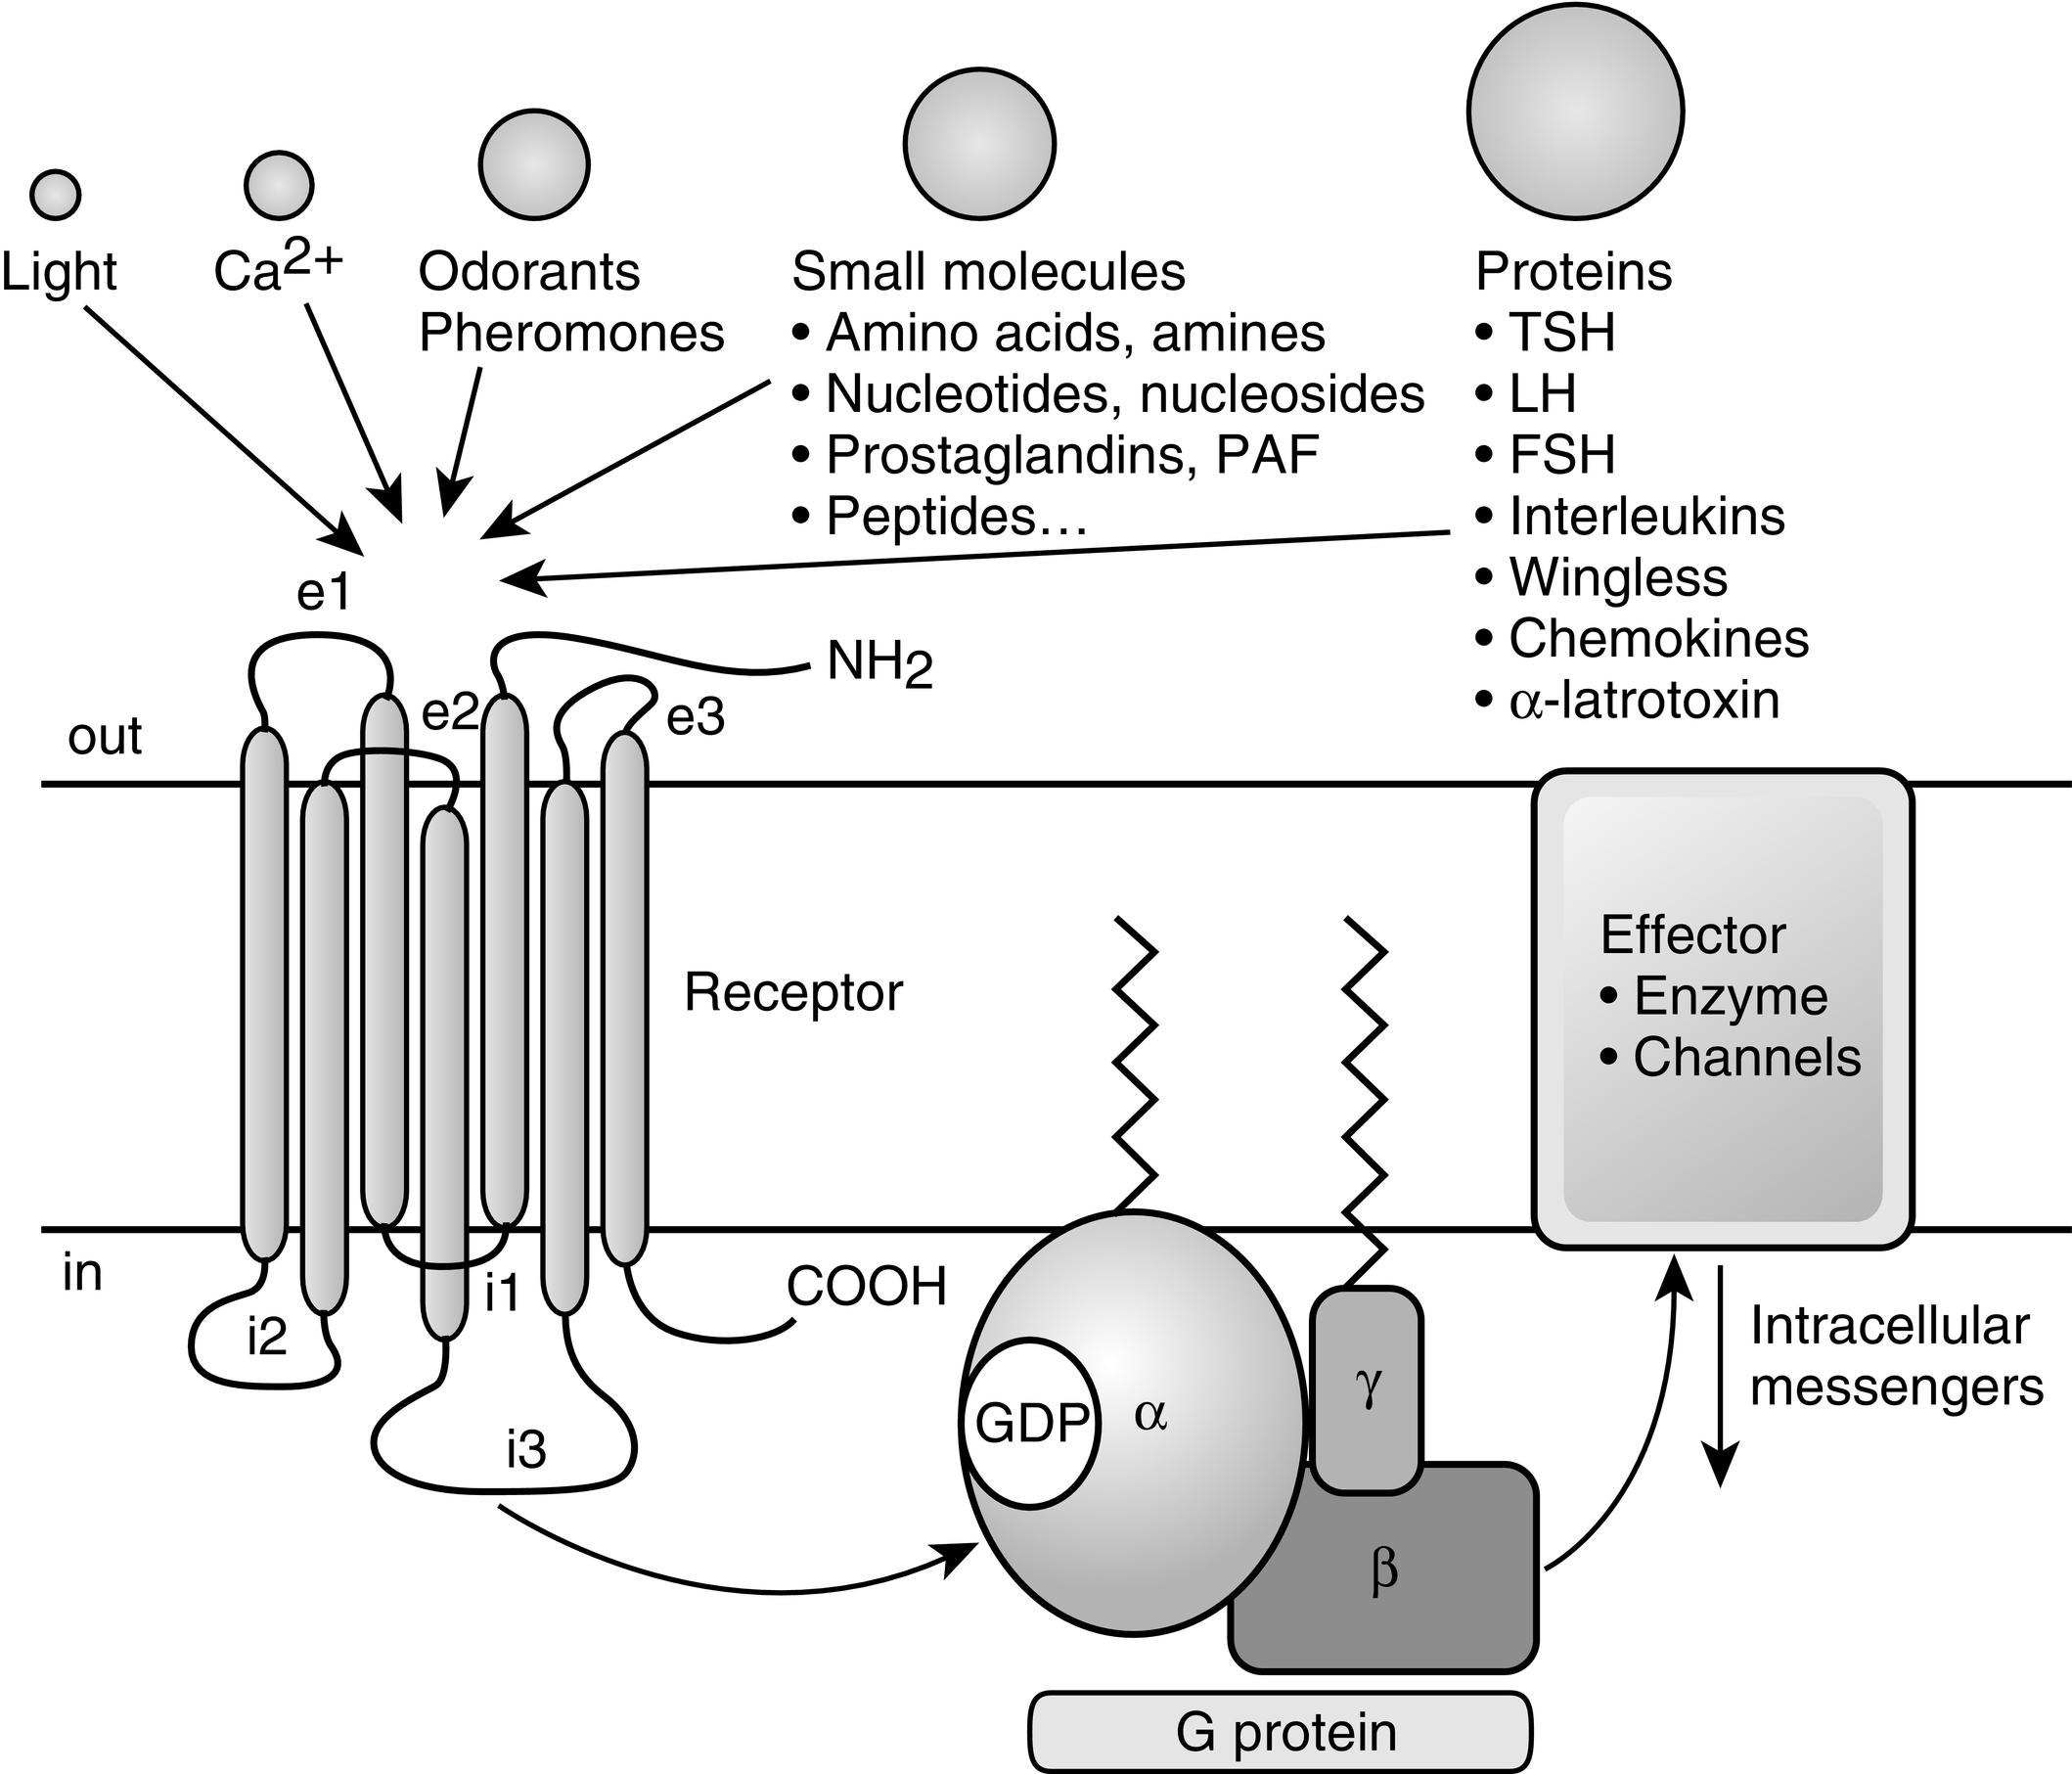 Fig. 3.1, G protein–coupled receptor (GPCR) structure and function. GPCRs have an amino-terminal extracellular domain, seven putative transmembrane domains separated by three extracellular loops (e1-e3) and three intracellular loops (i1-i3), and a carboxy-terminal intracellular domain. Ligand binding results in the exchange of guanosine 5’-triphosphate (GTP) for guanosine 5’-diphosphate (GDP), which induces dissociation of the G protein into a GTPα subunit and a βγ subunit. Then these subunits alter the activity of intracellular effector enzymes and transmembrane channels, resulting in the alteration of intracellular levels of second messengers that can include cyclic adenosine monophosphate and calcium.